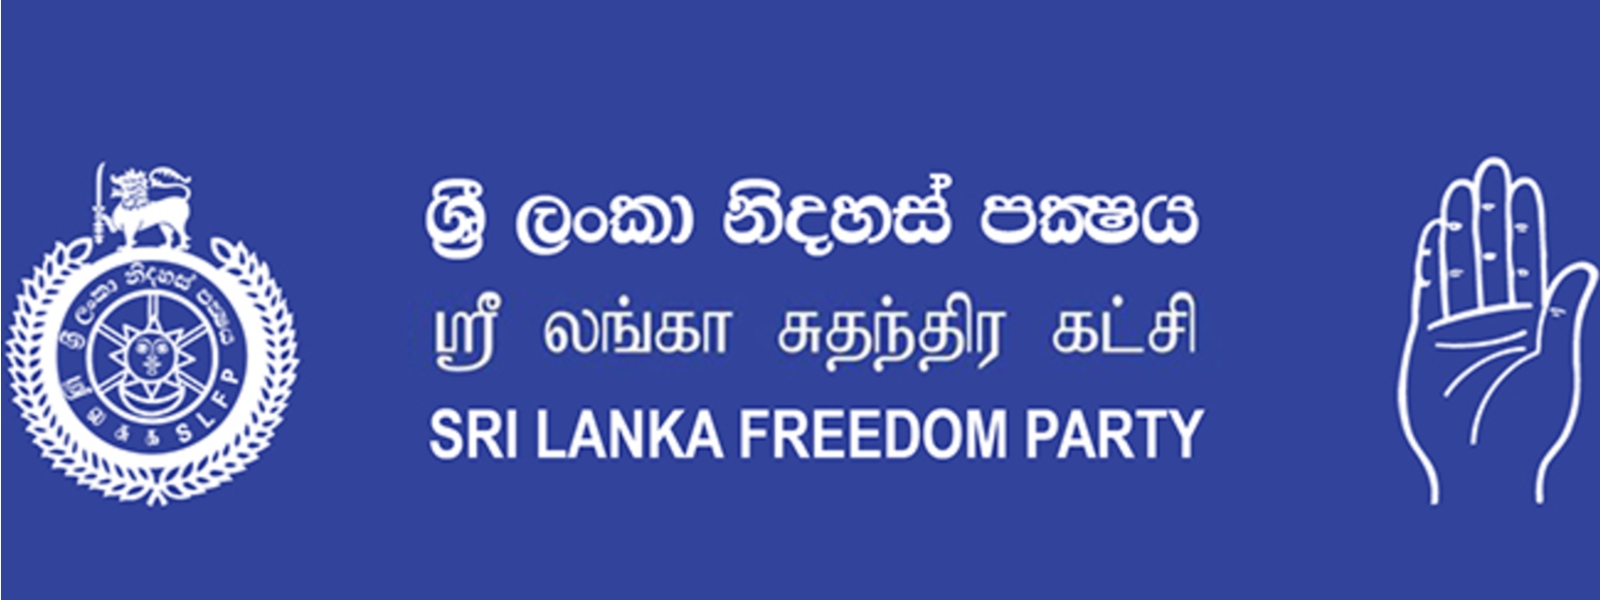 SLFP decides to attend meeting with President